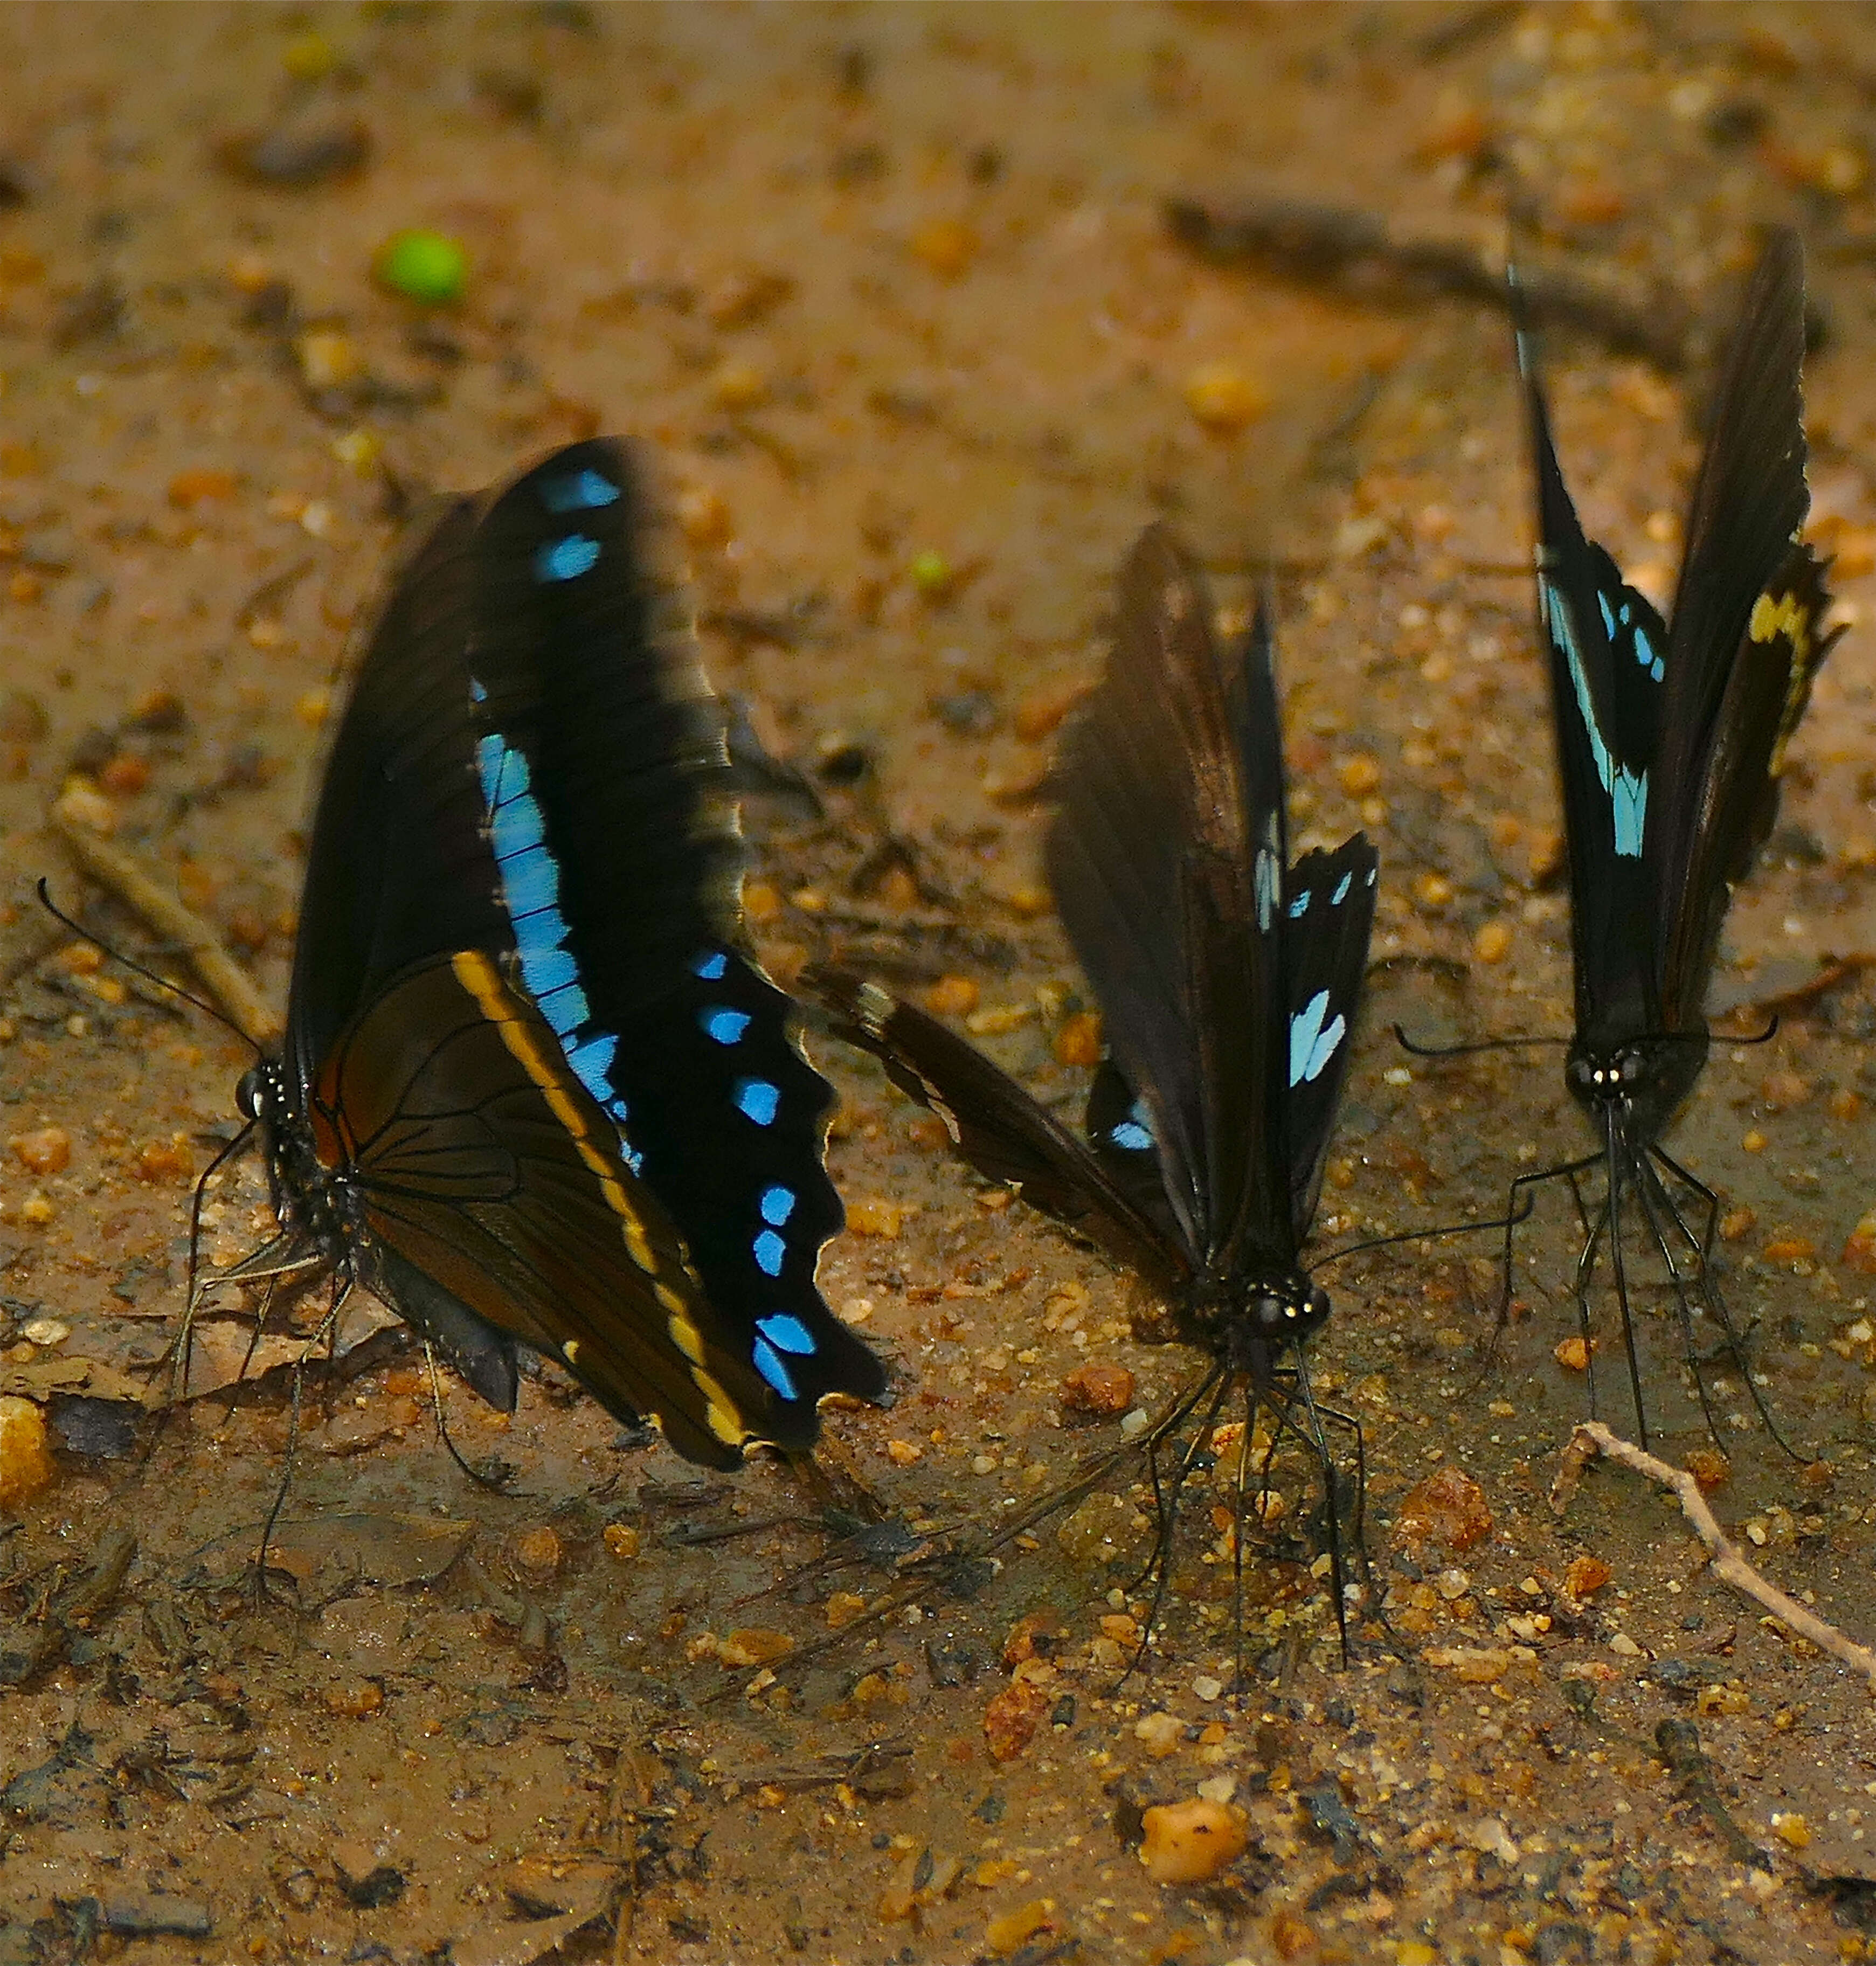 Image of greenbanded swallowtail